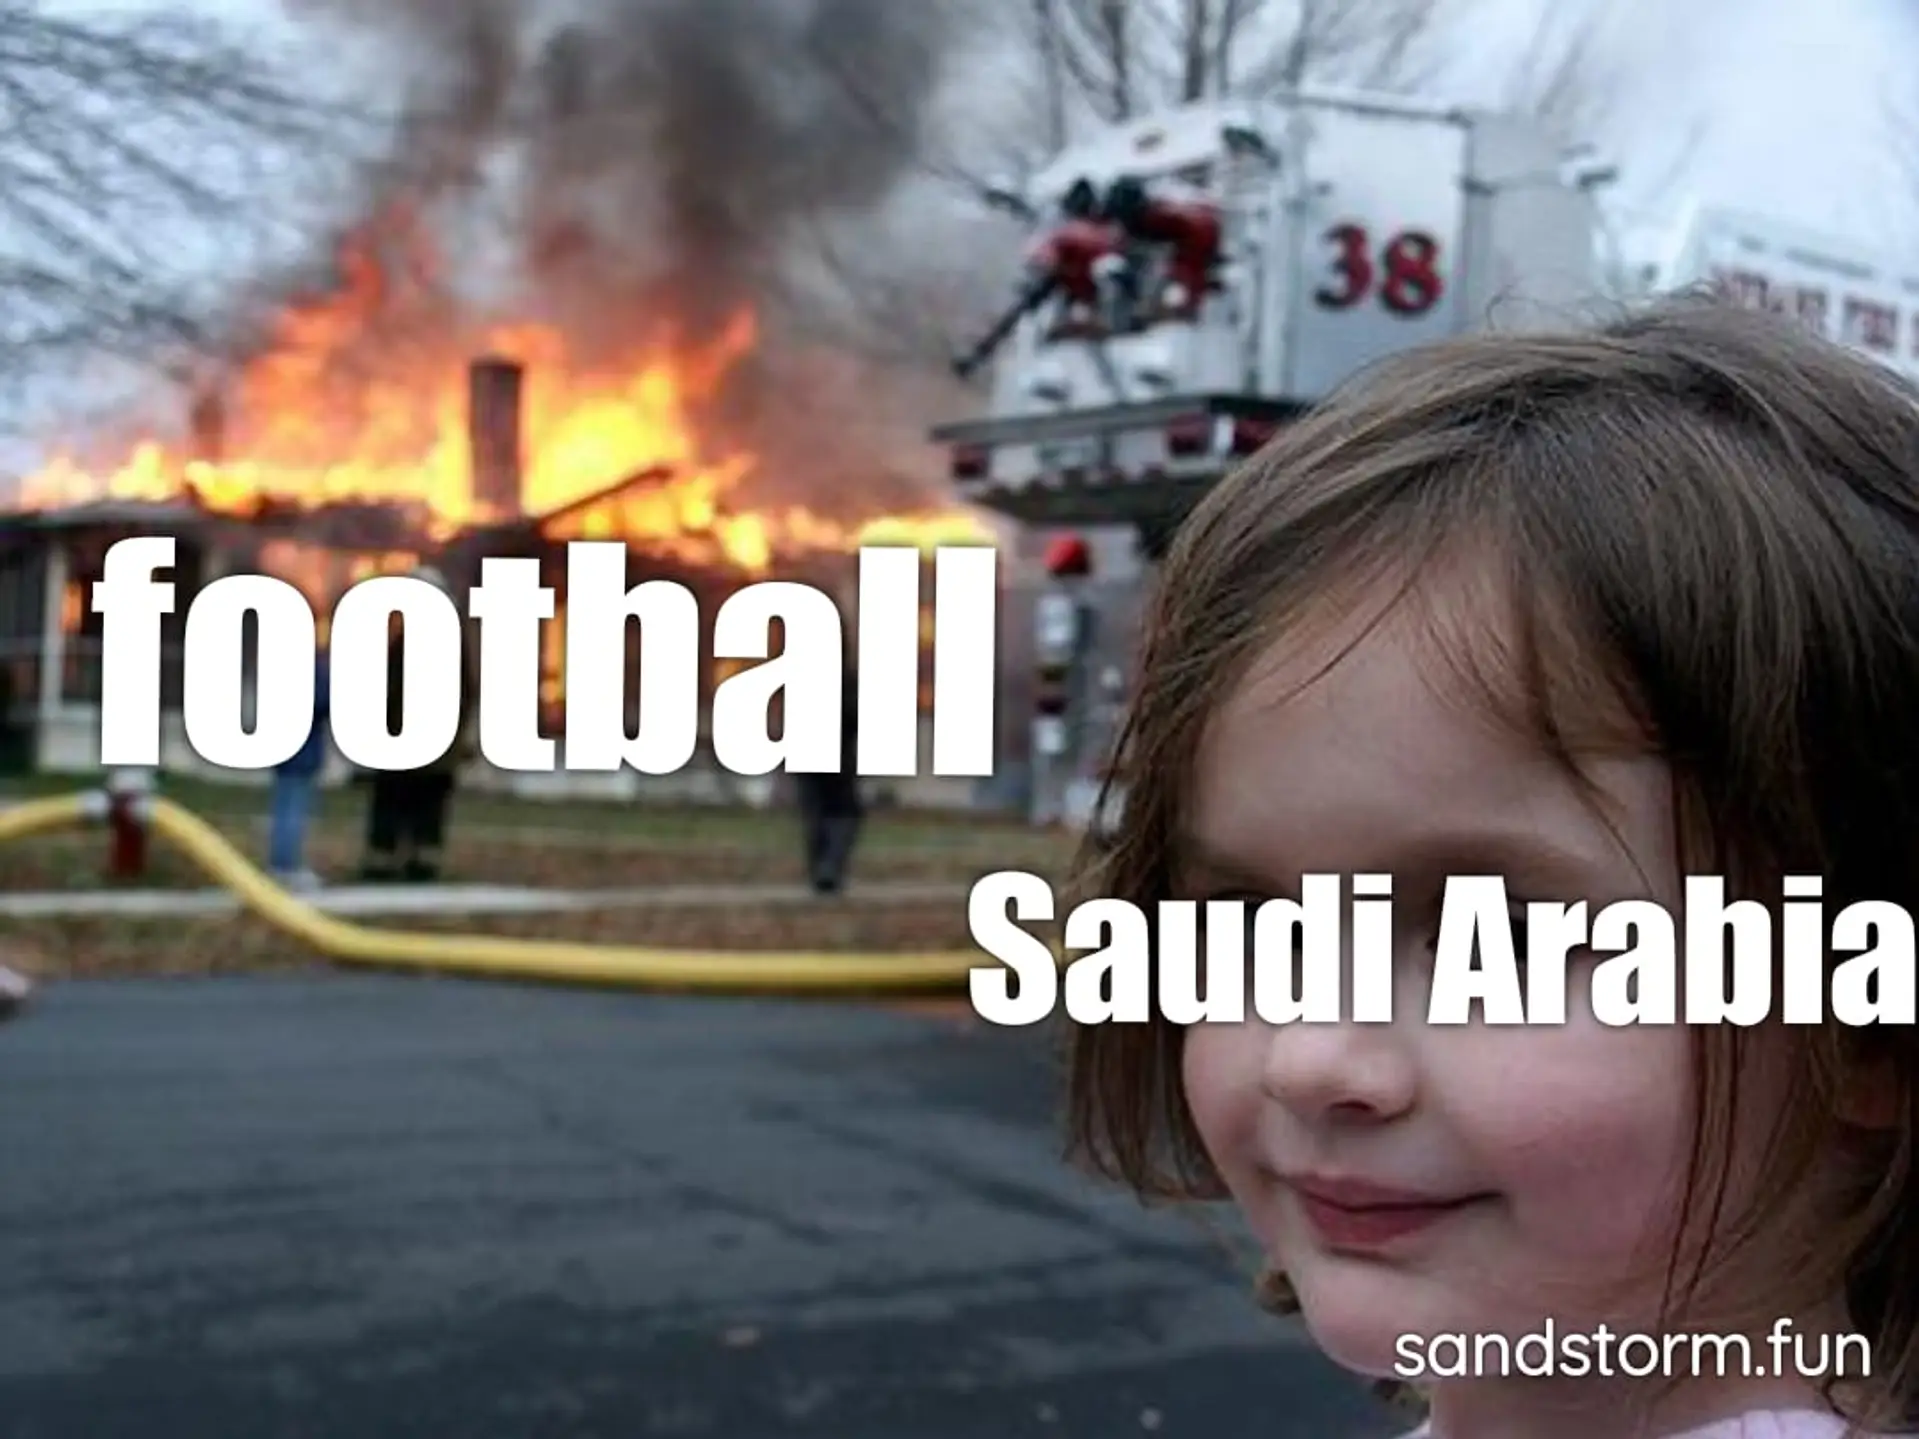 What Saudi Arabia has done to football and Liverpool 